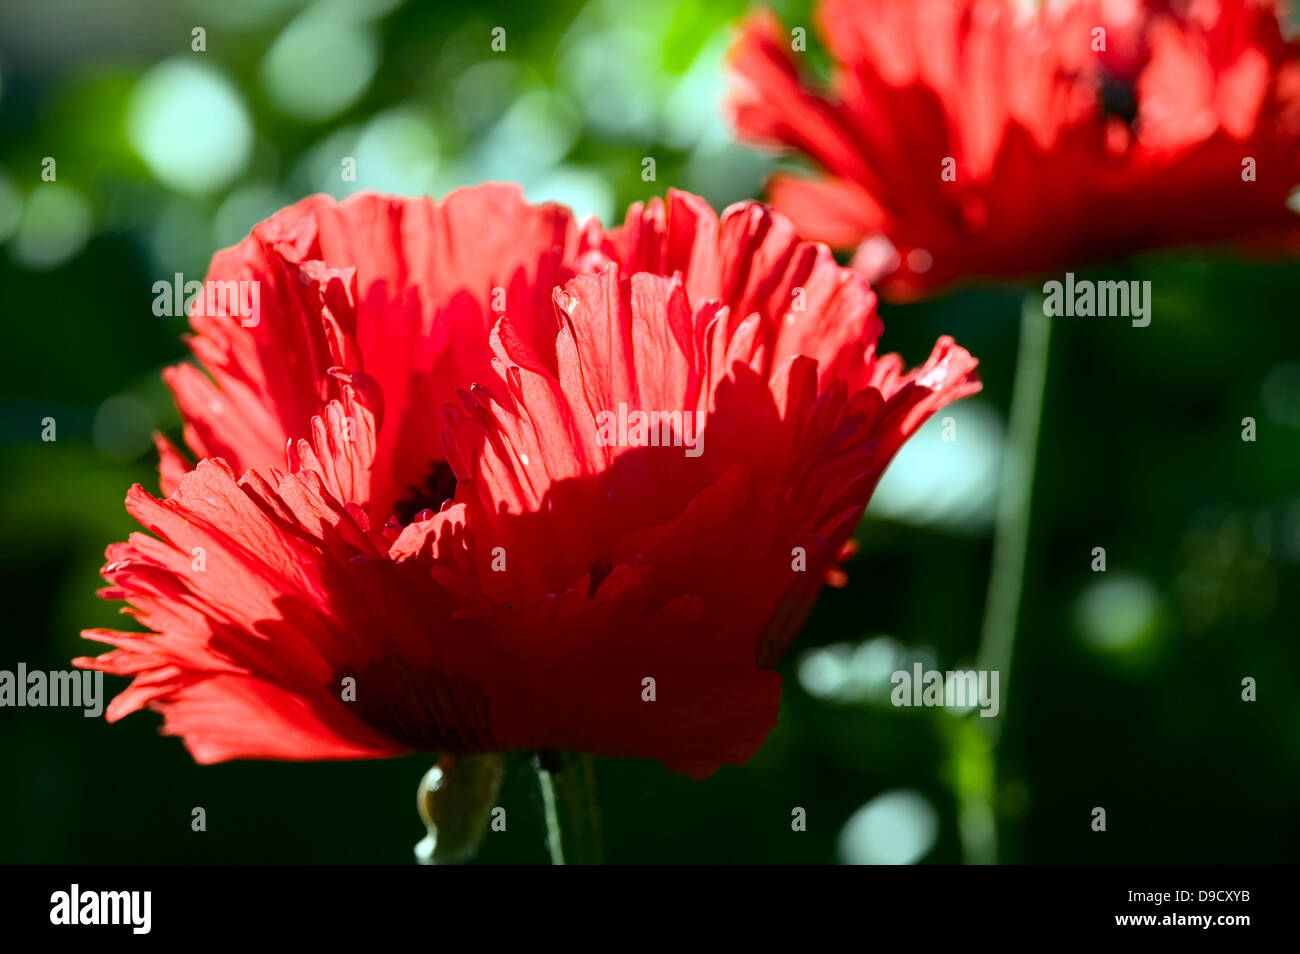 The red flower on green nature background Stock Photo